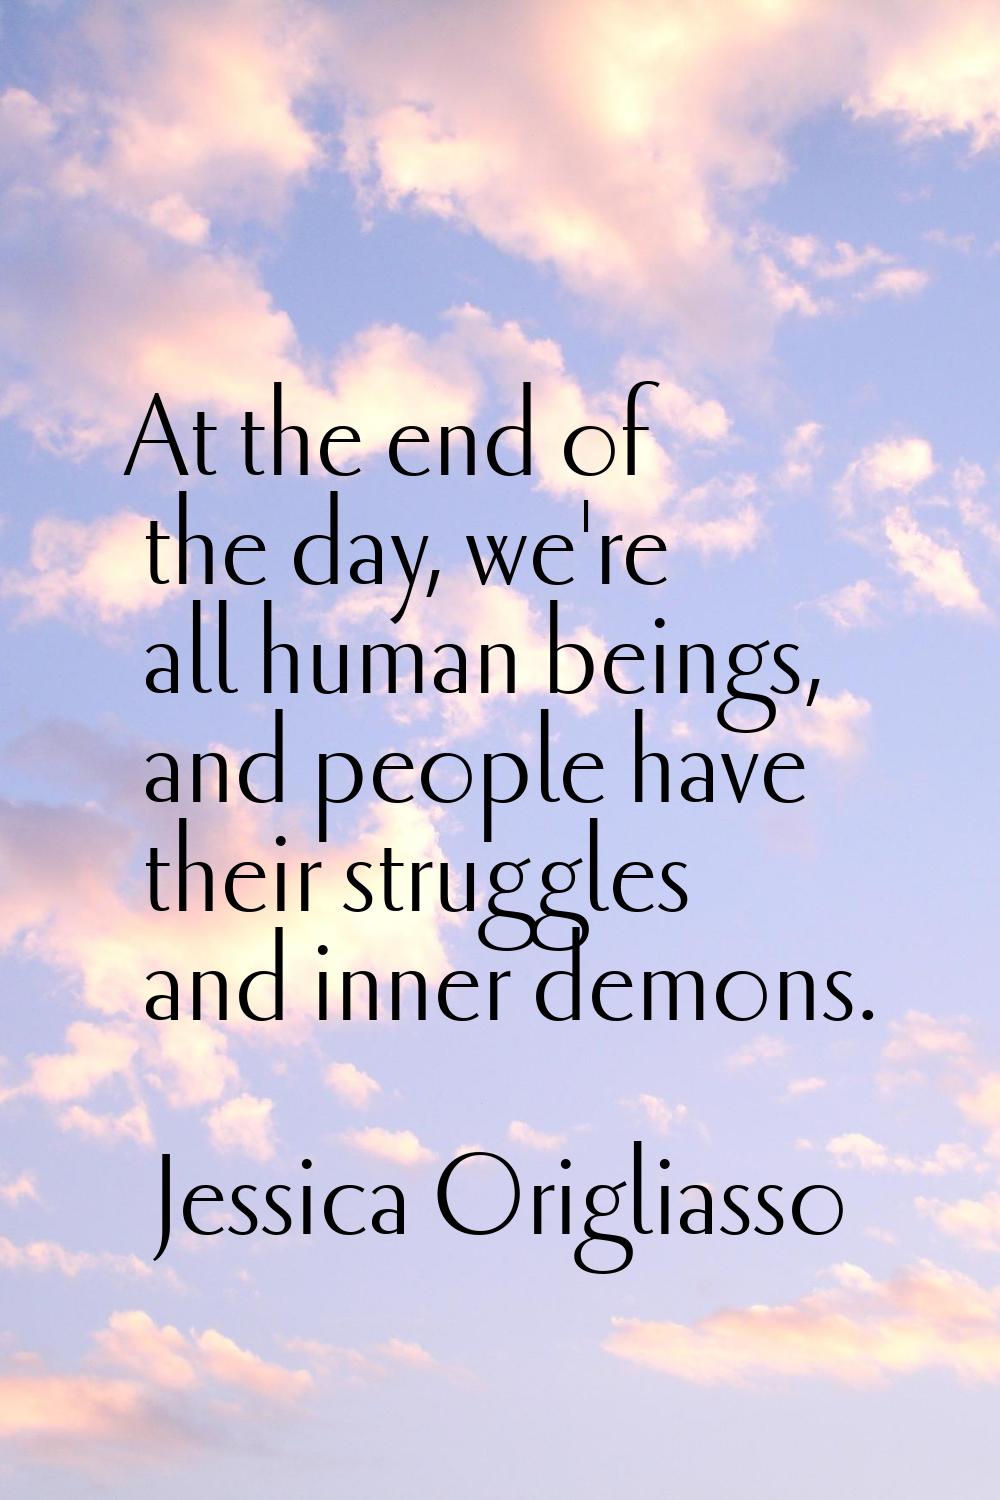 At the end of the day, we're all human beings, and people have their struggles and inner demons.